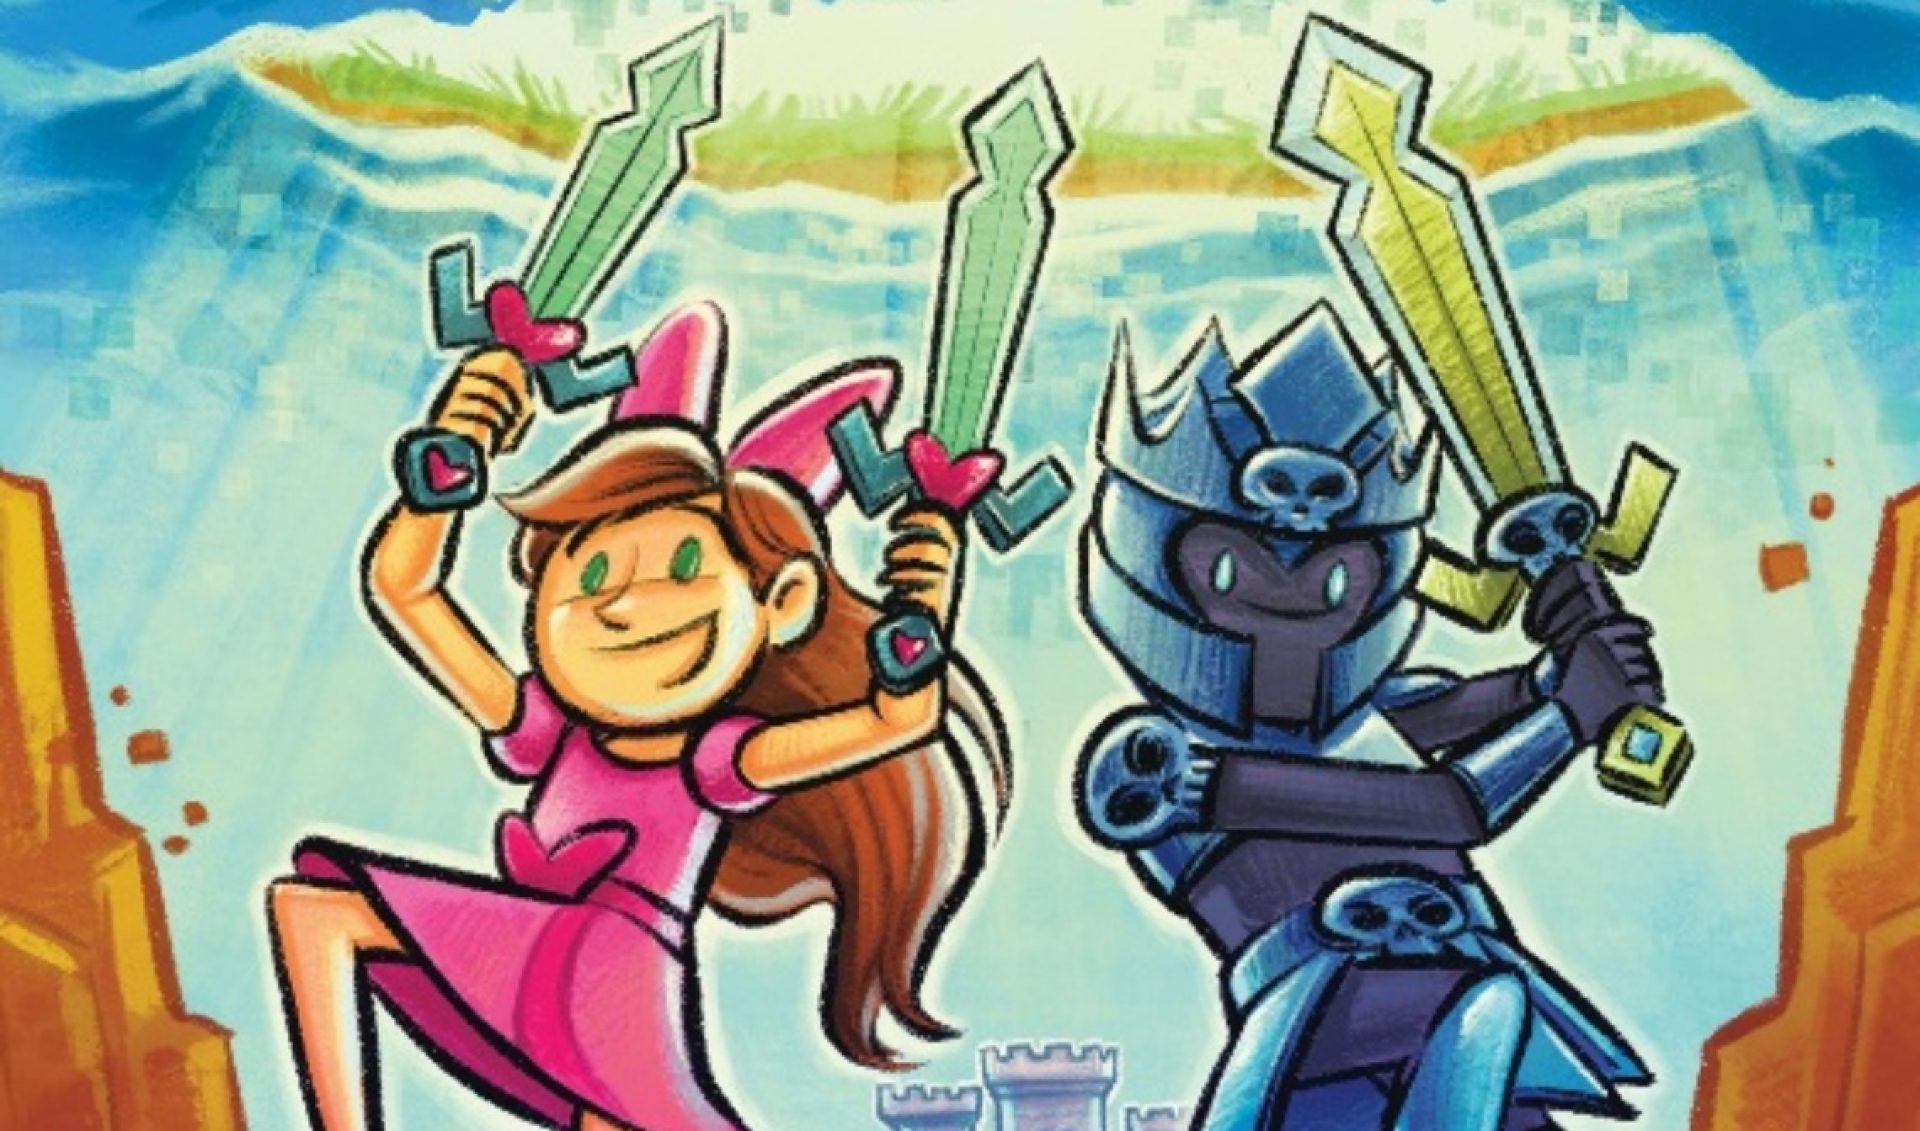 Notable Minecraft Channel PopularMMOs Will Publish Graphic Novel Alongside HarperCollins